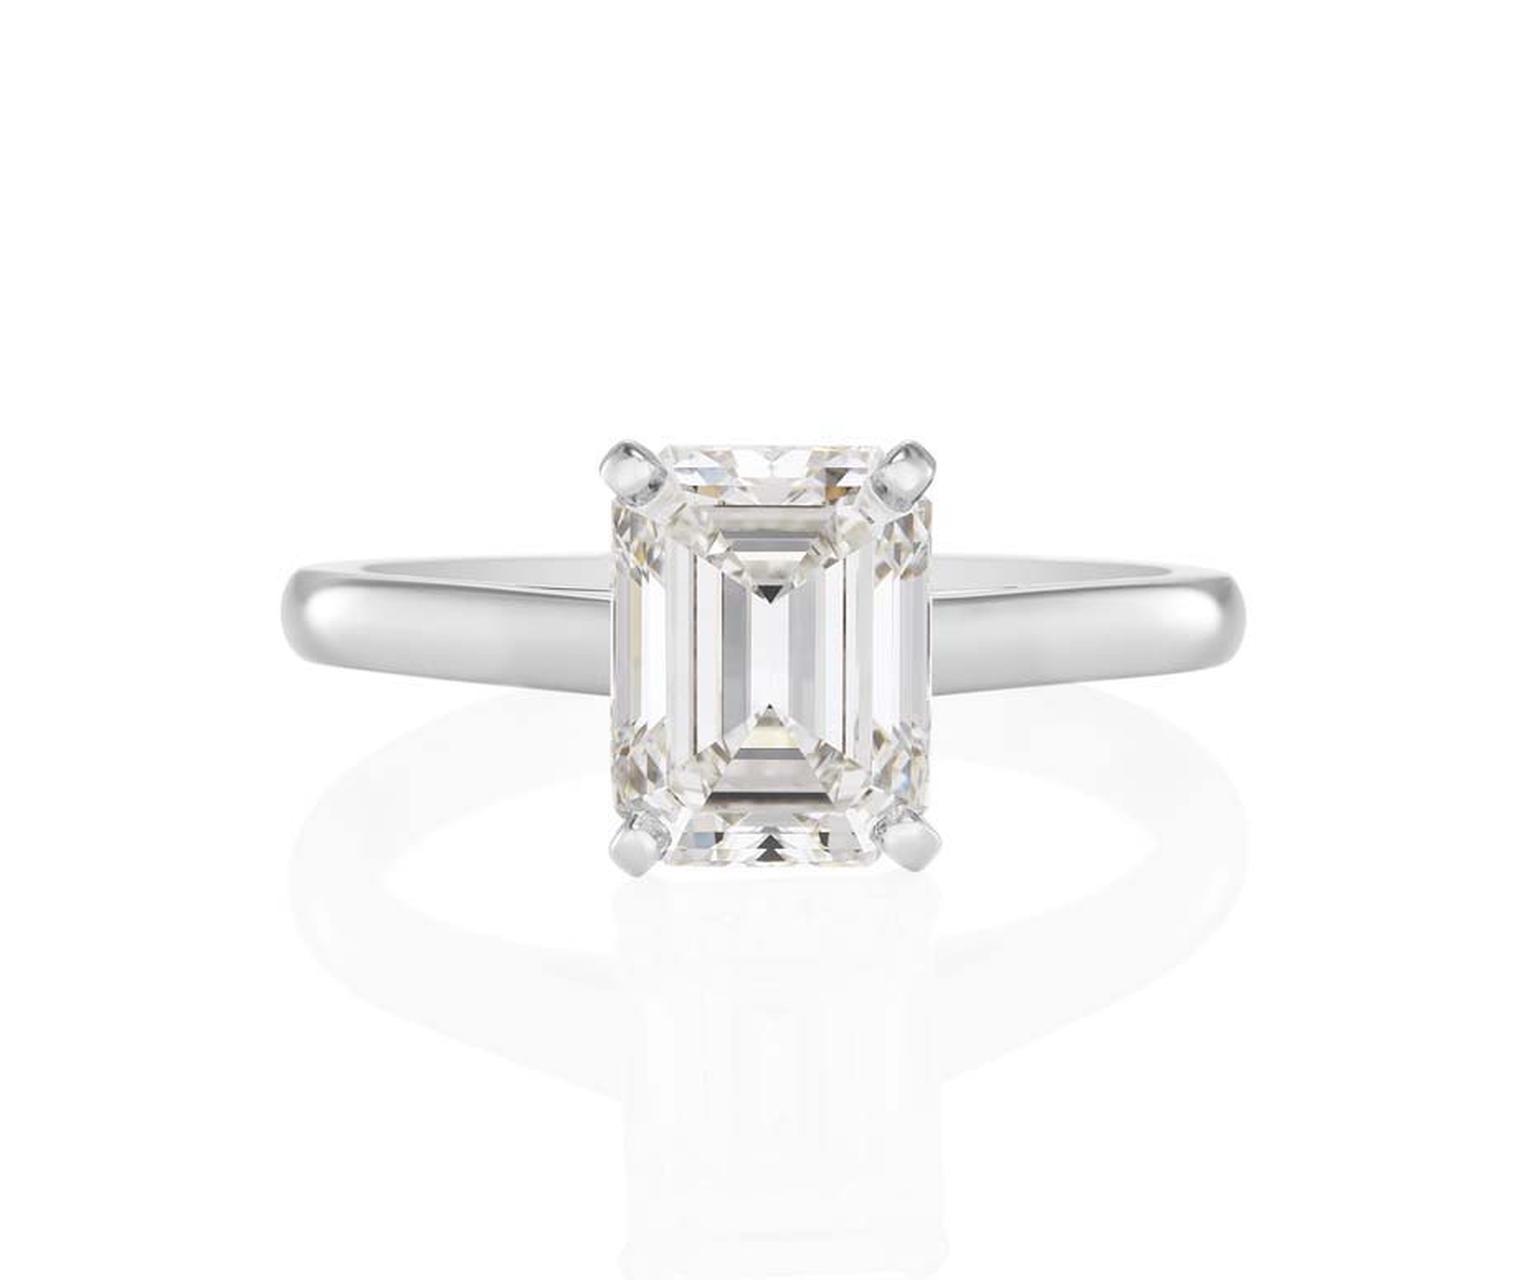 De Beers Classic Solitaire engagement ring featuring a four-prong-set emerald-cut solitaire on a platinum ban